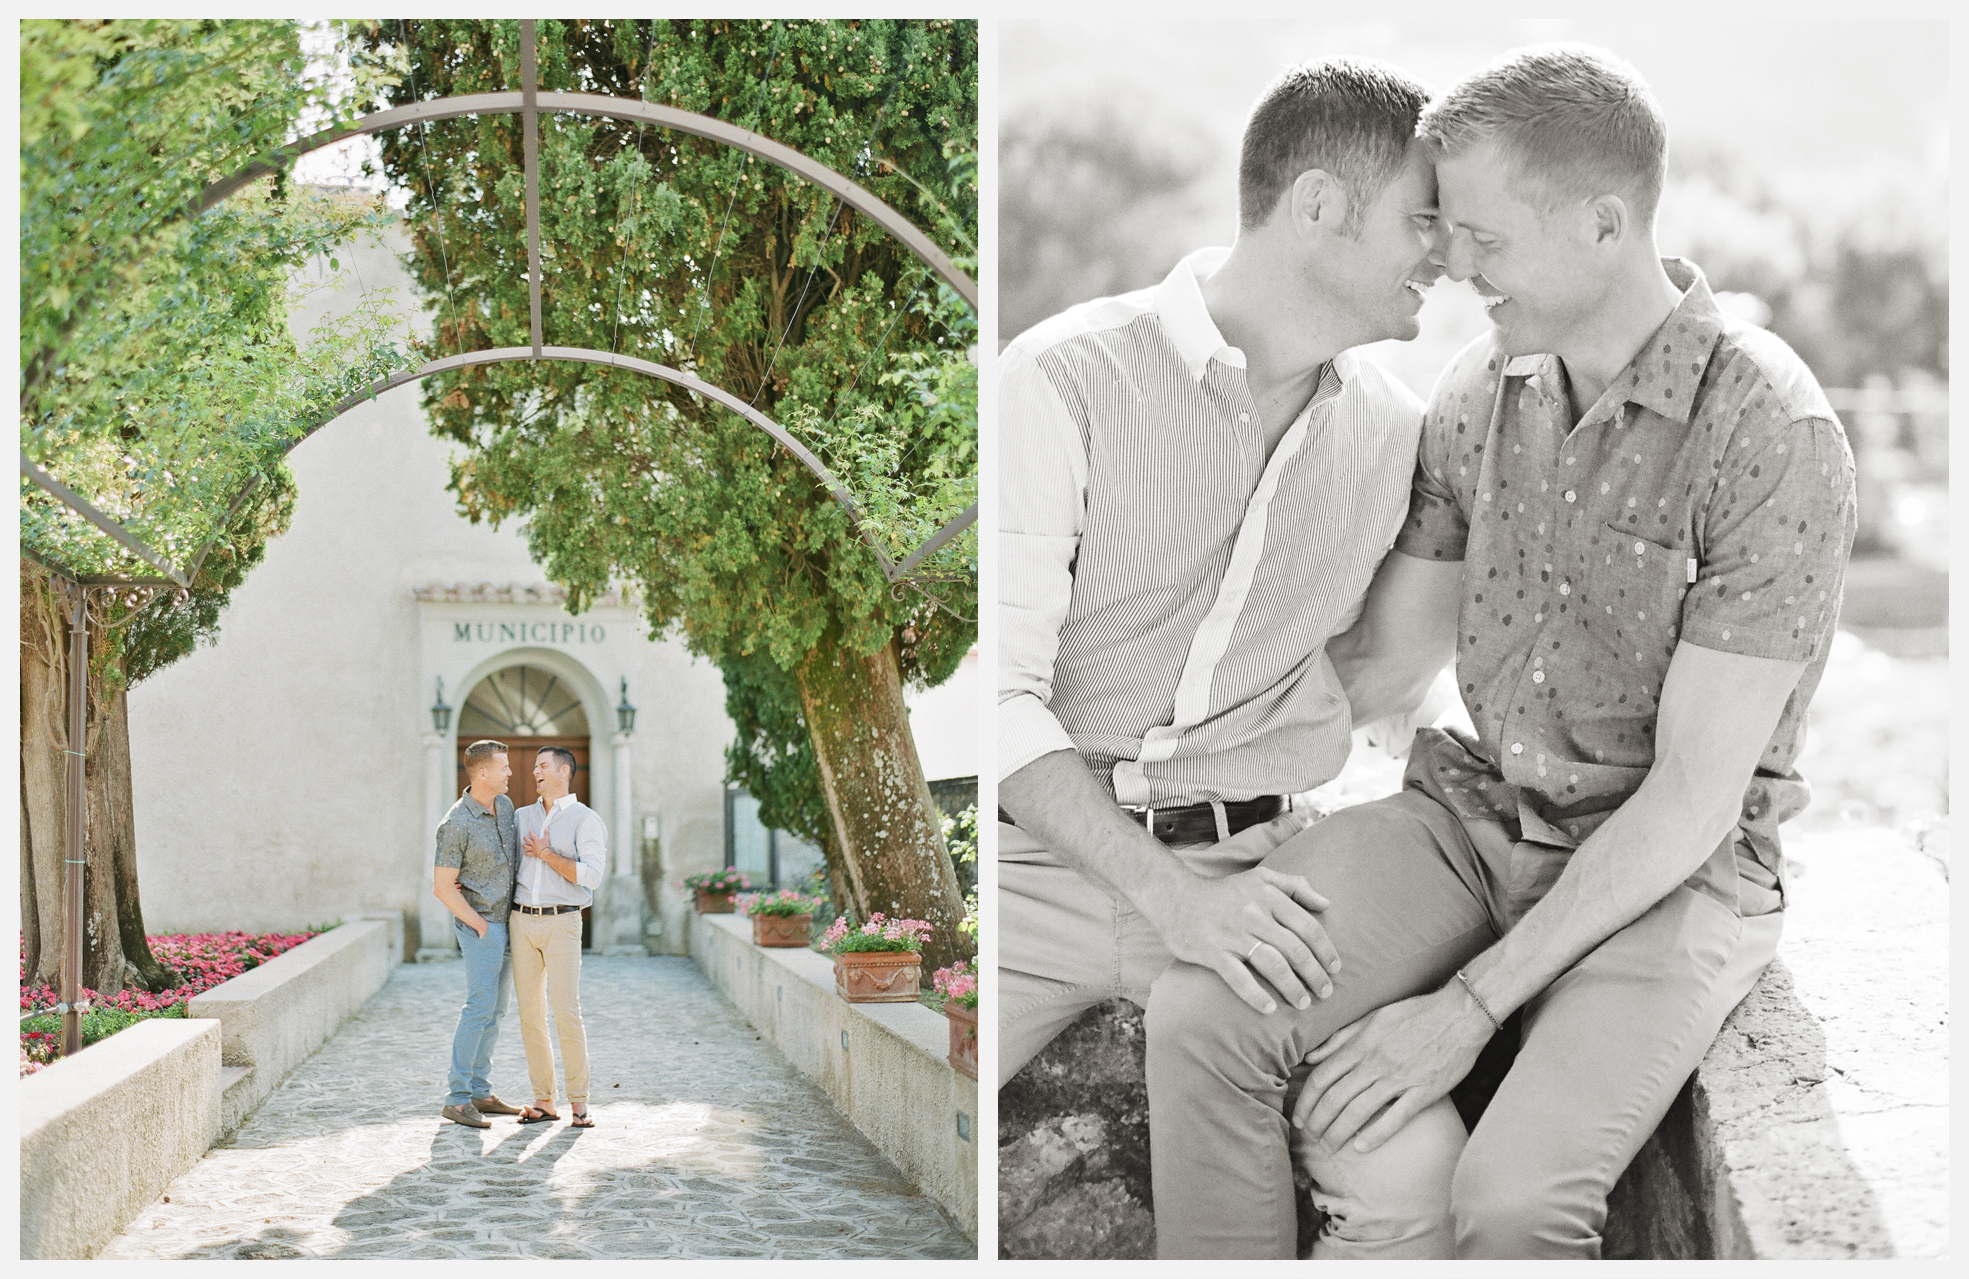 Ravello on the Amalfi Coast was the perfect location for this San Fransisco based same sex couple and their engagement session.